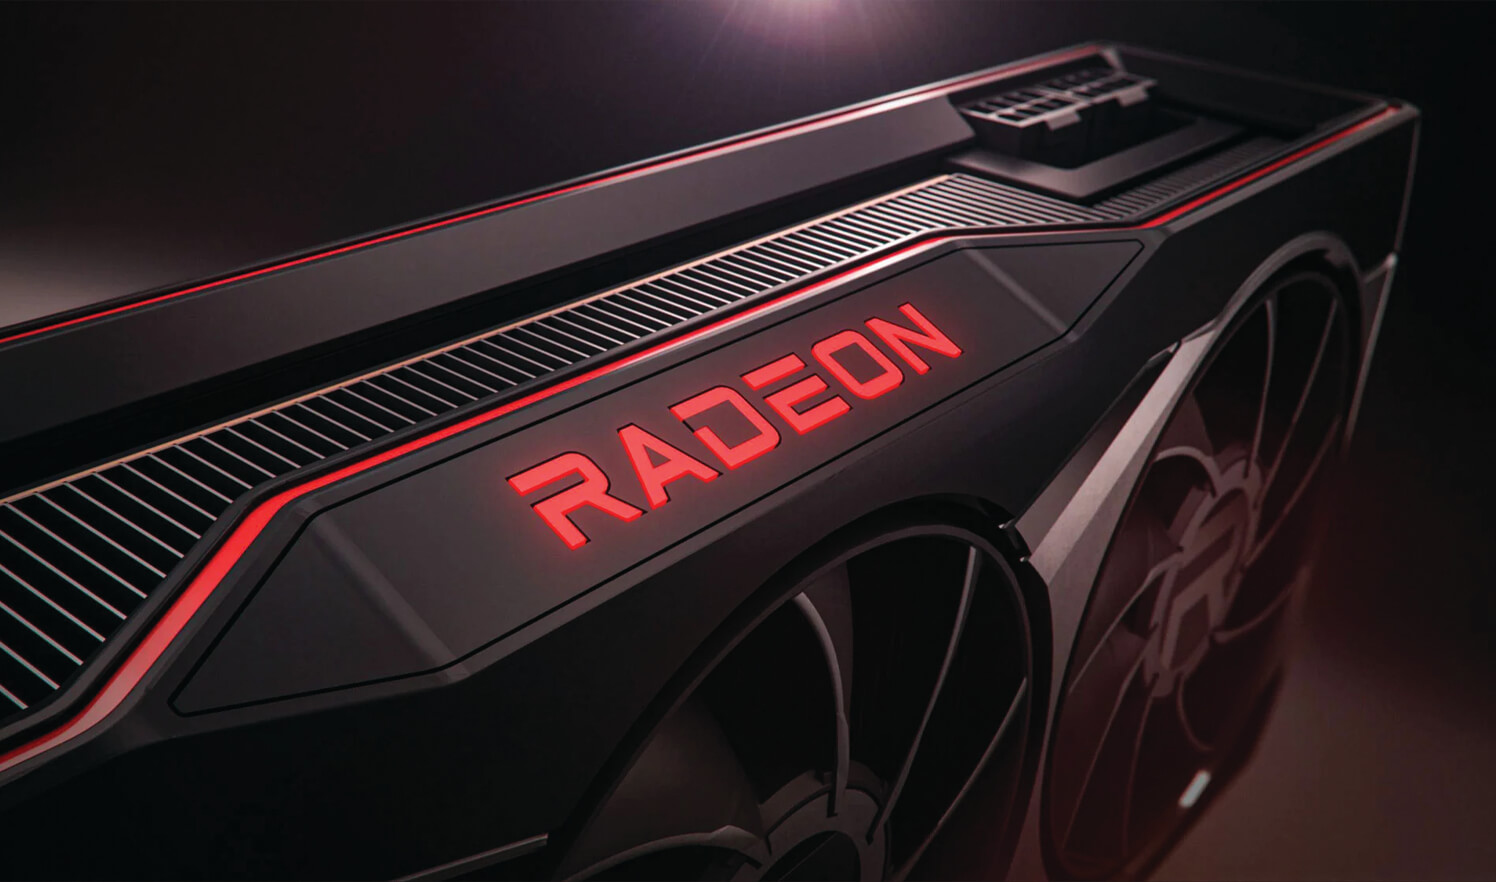 AMD GPU will get a massive performance boost for free